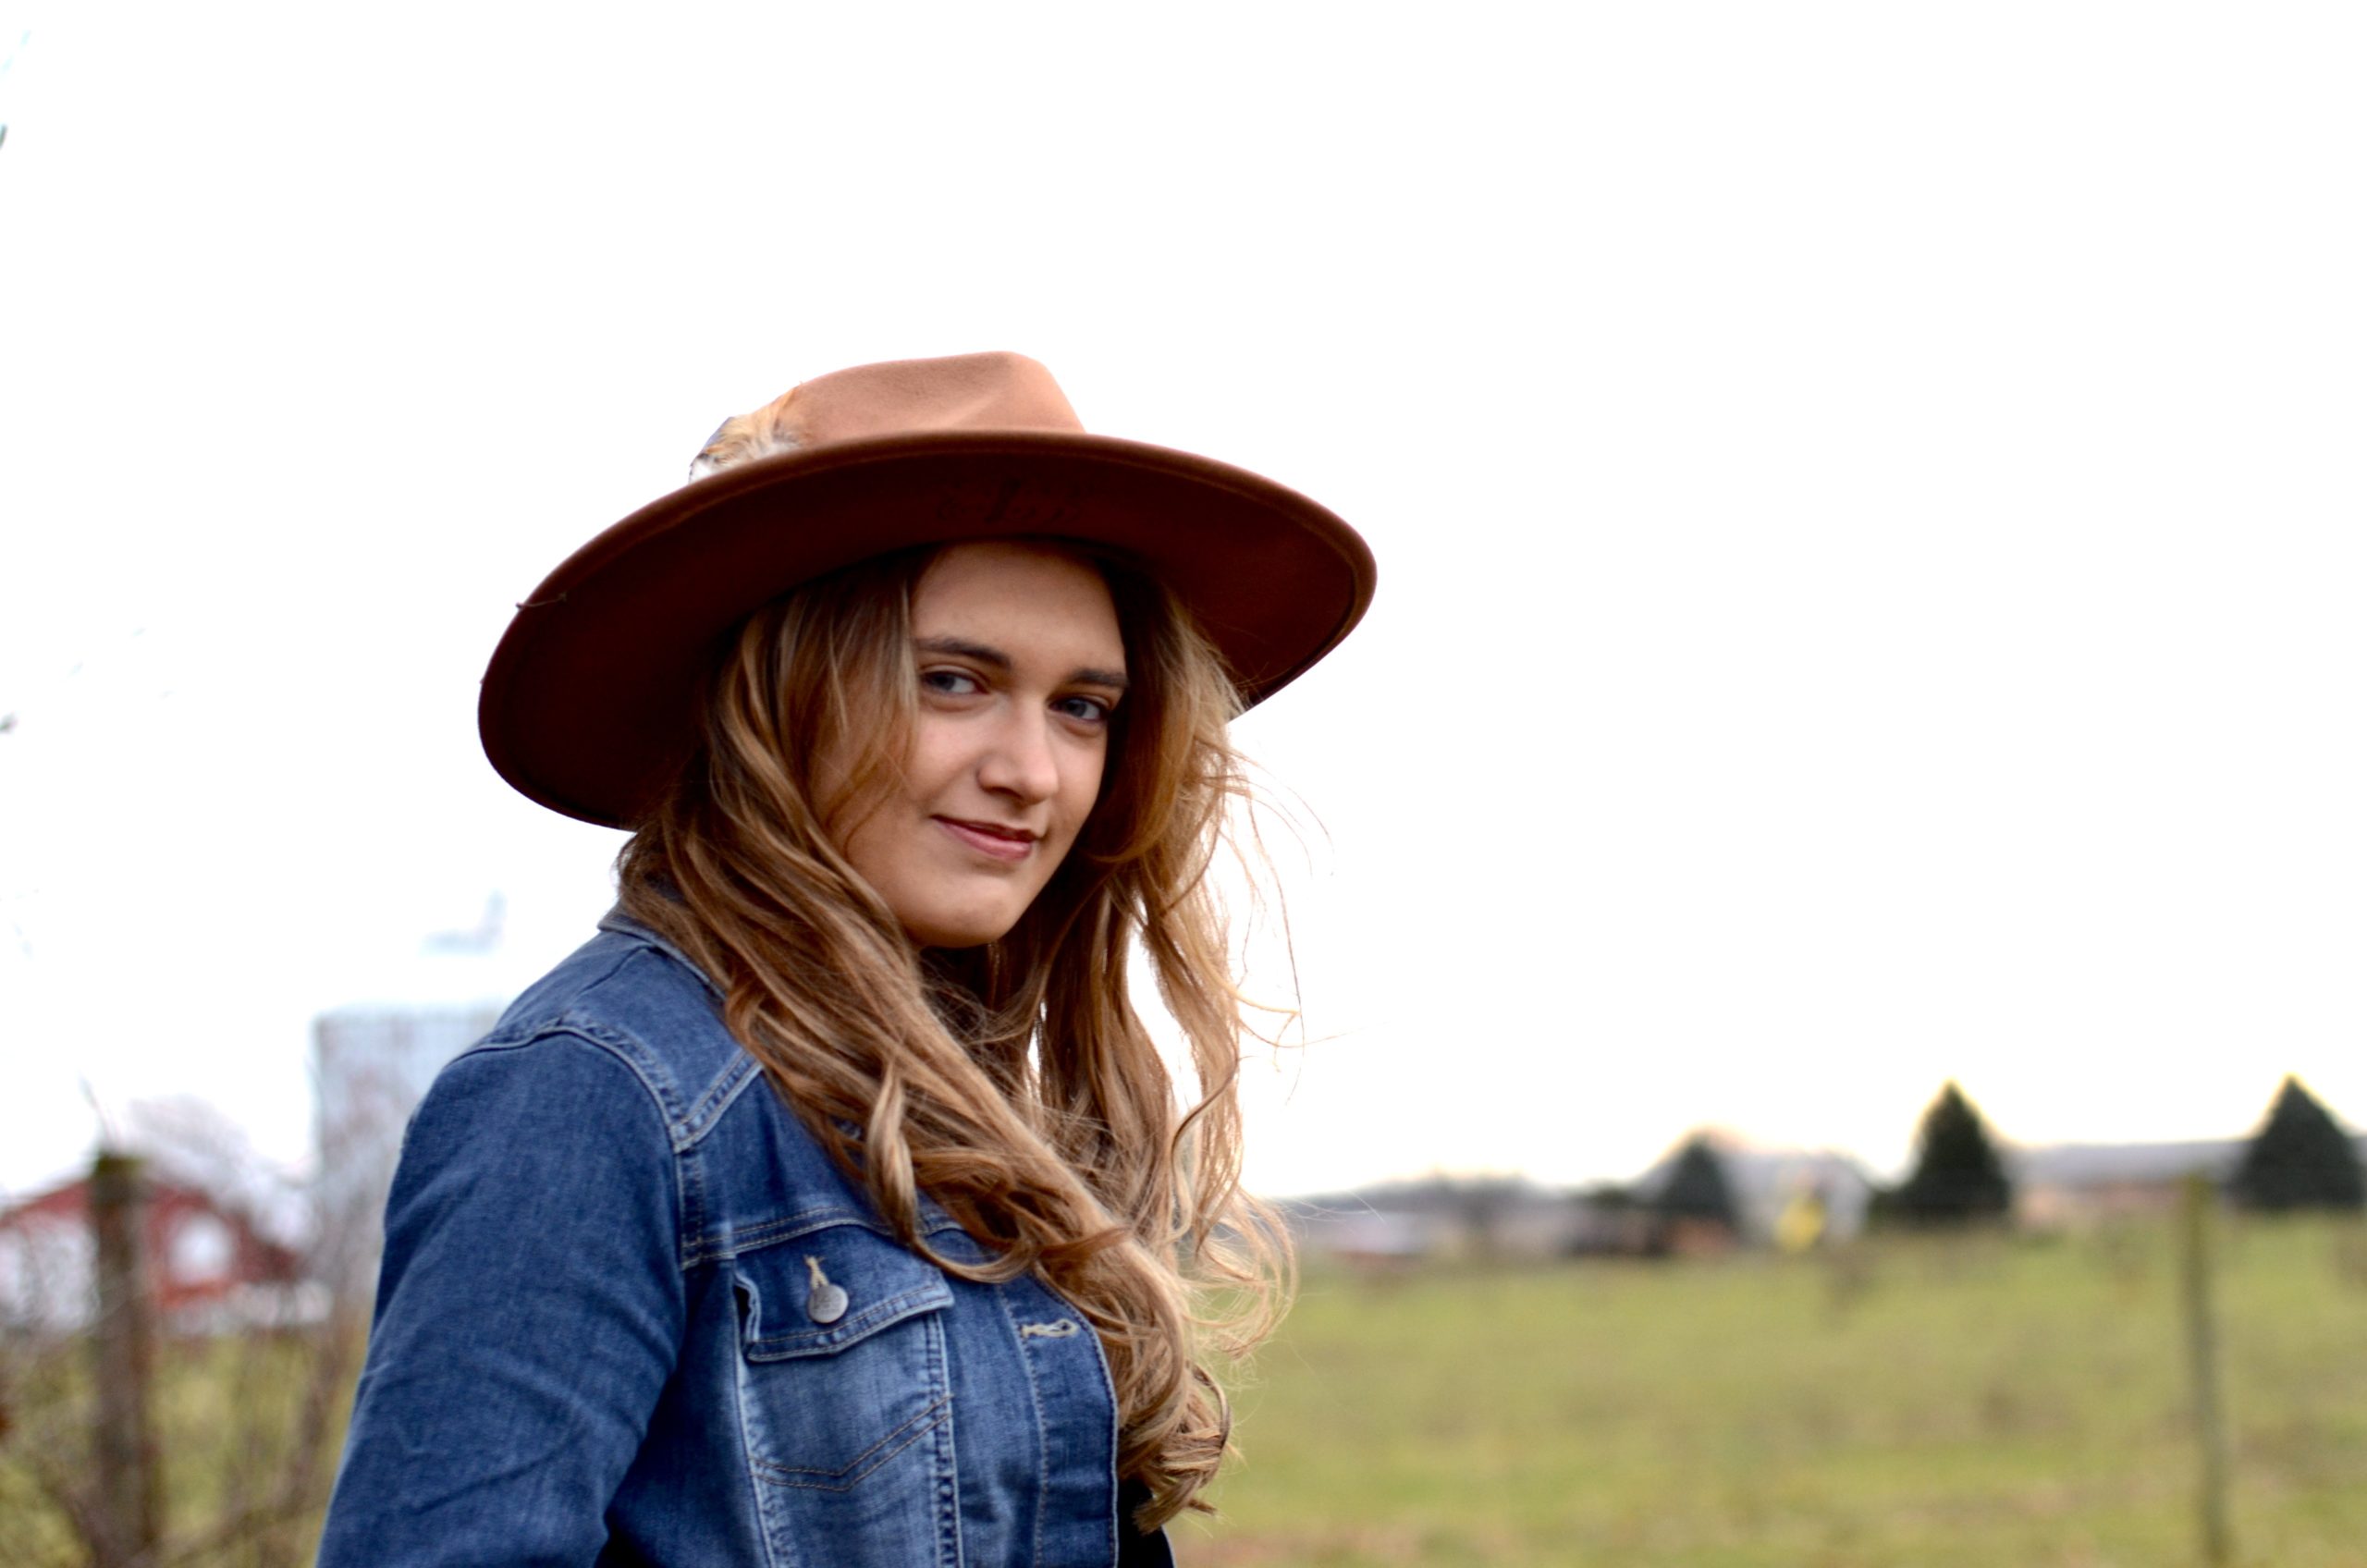 A woman in a hat and jeans standing in a field of wildflowers.